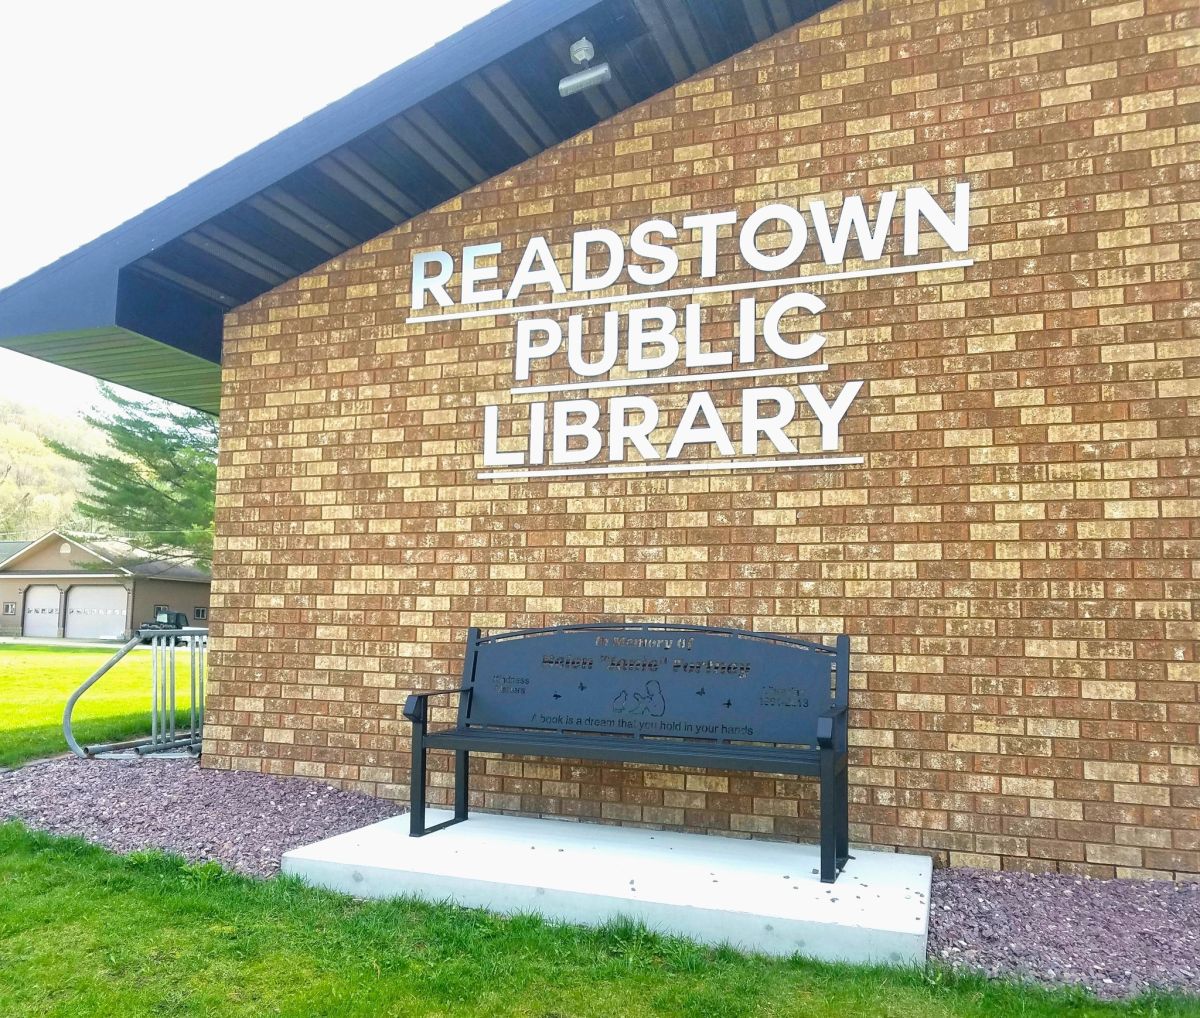 Readstown Public Library